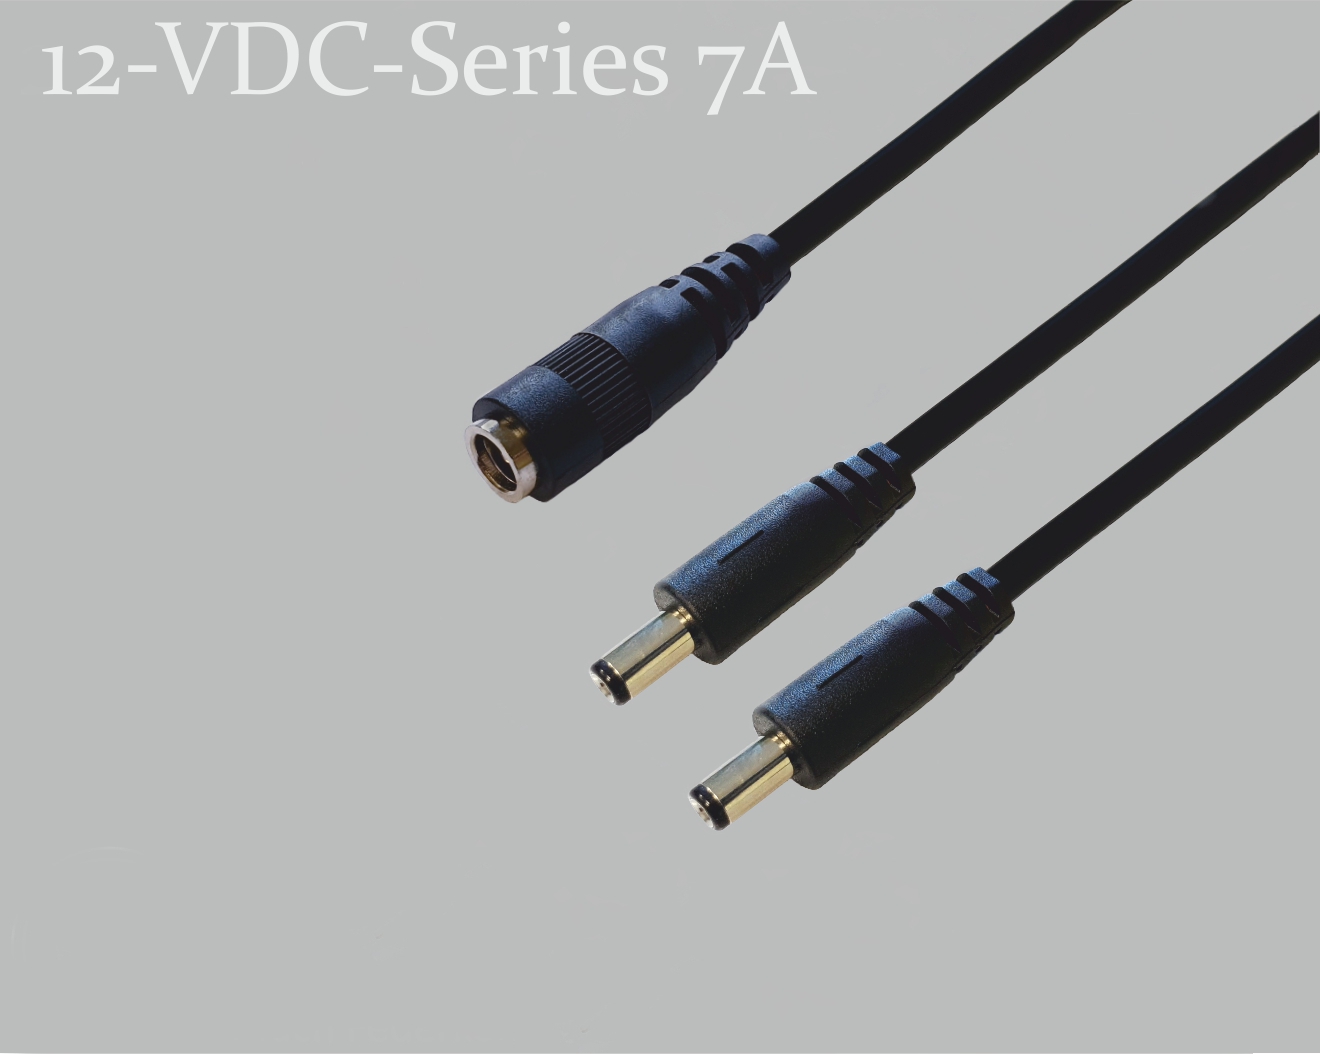 12-VDC-Series 7A, DC distributor 1x DC coupling to 2x DC plug with spring contact, 2.1x5.5mm, round cable 2x0.5mm², black, 0.3m